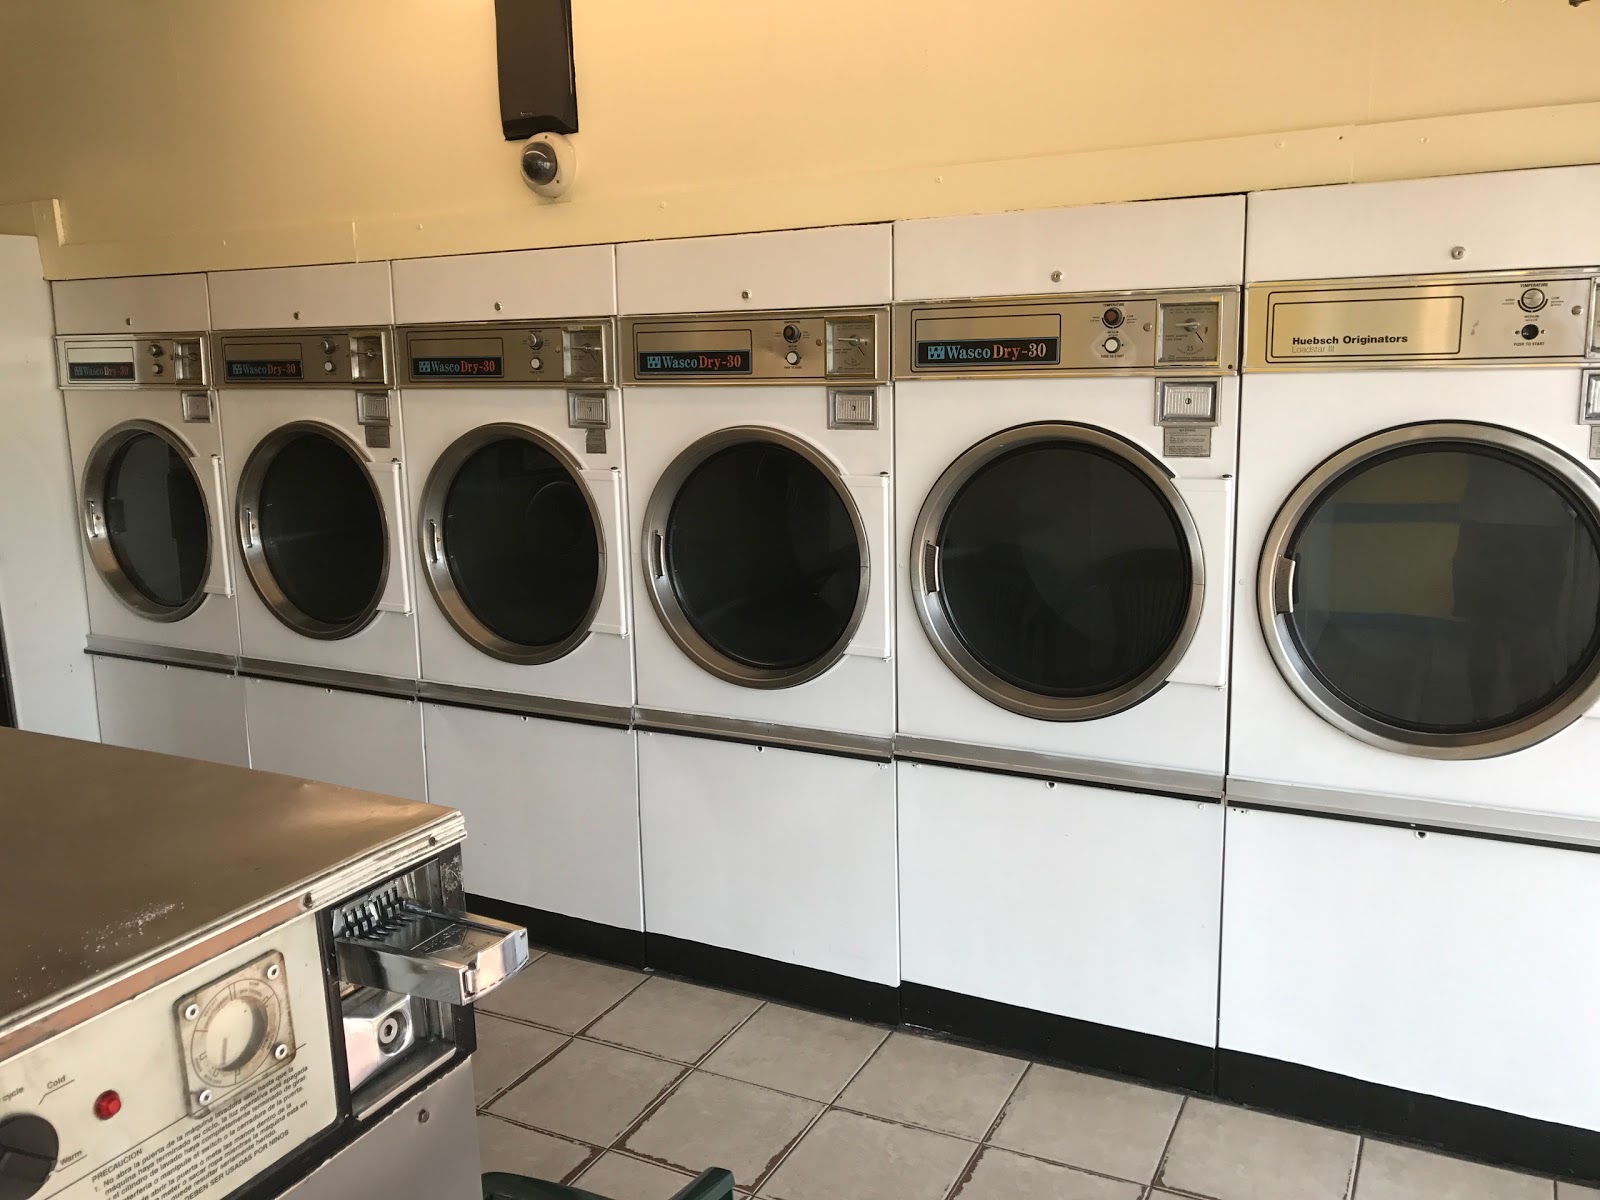 49th Street Coin Laundry